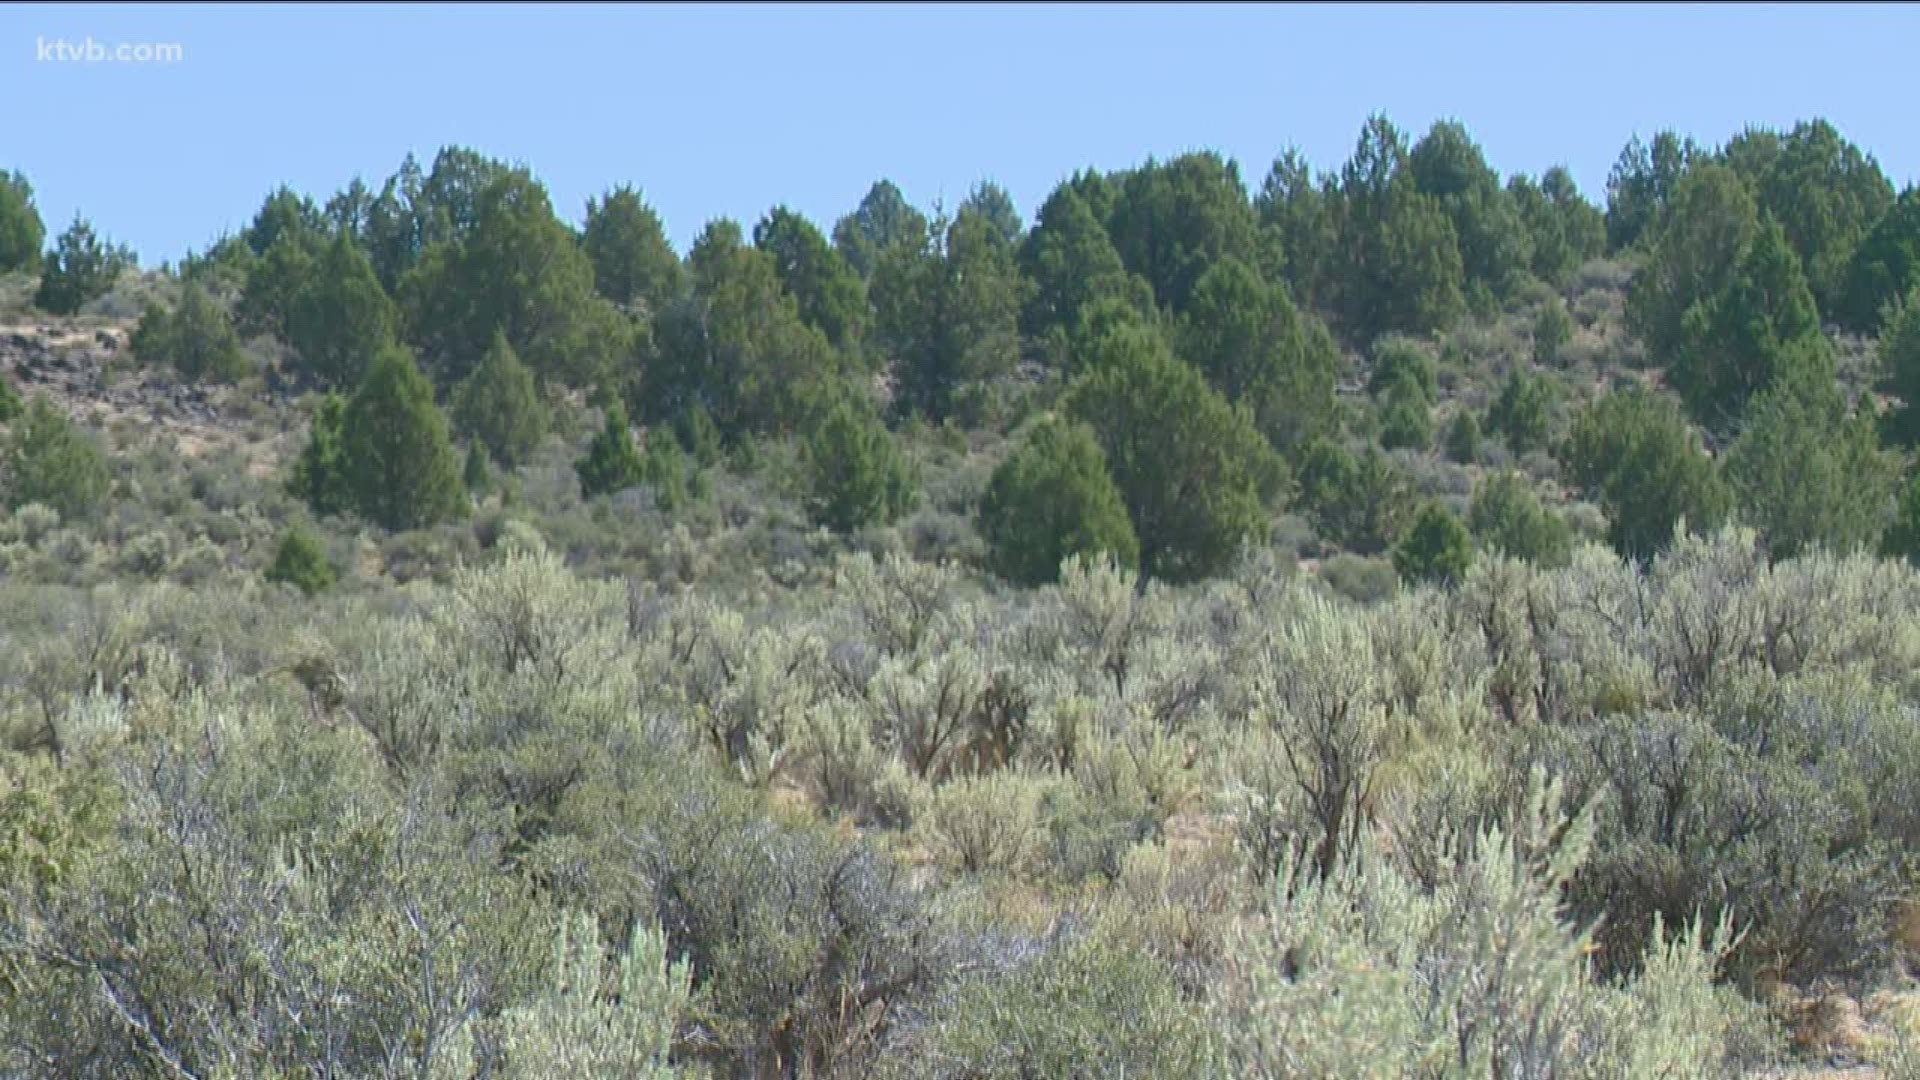 The spread of junipers in Owyhee County are having negative impact on sage grouse populations, officials say.